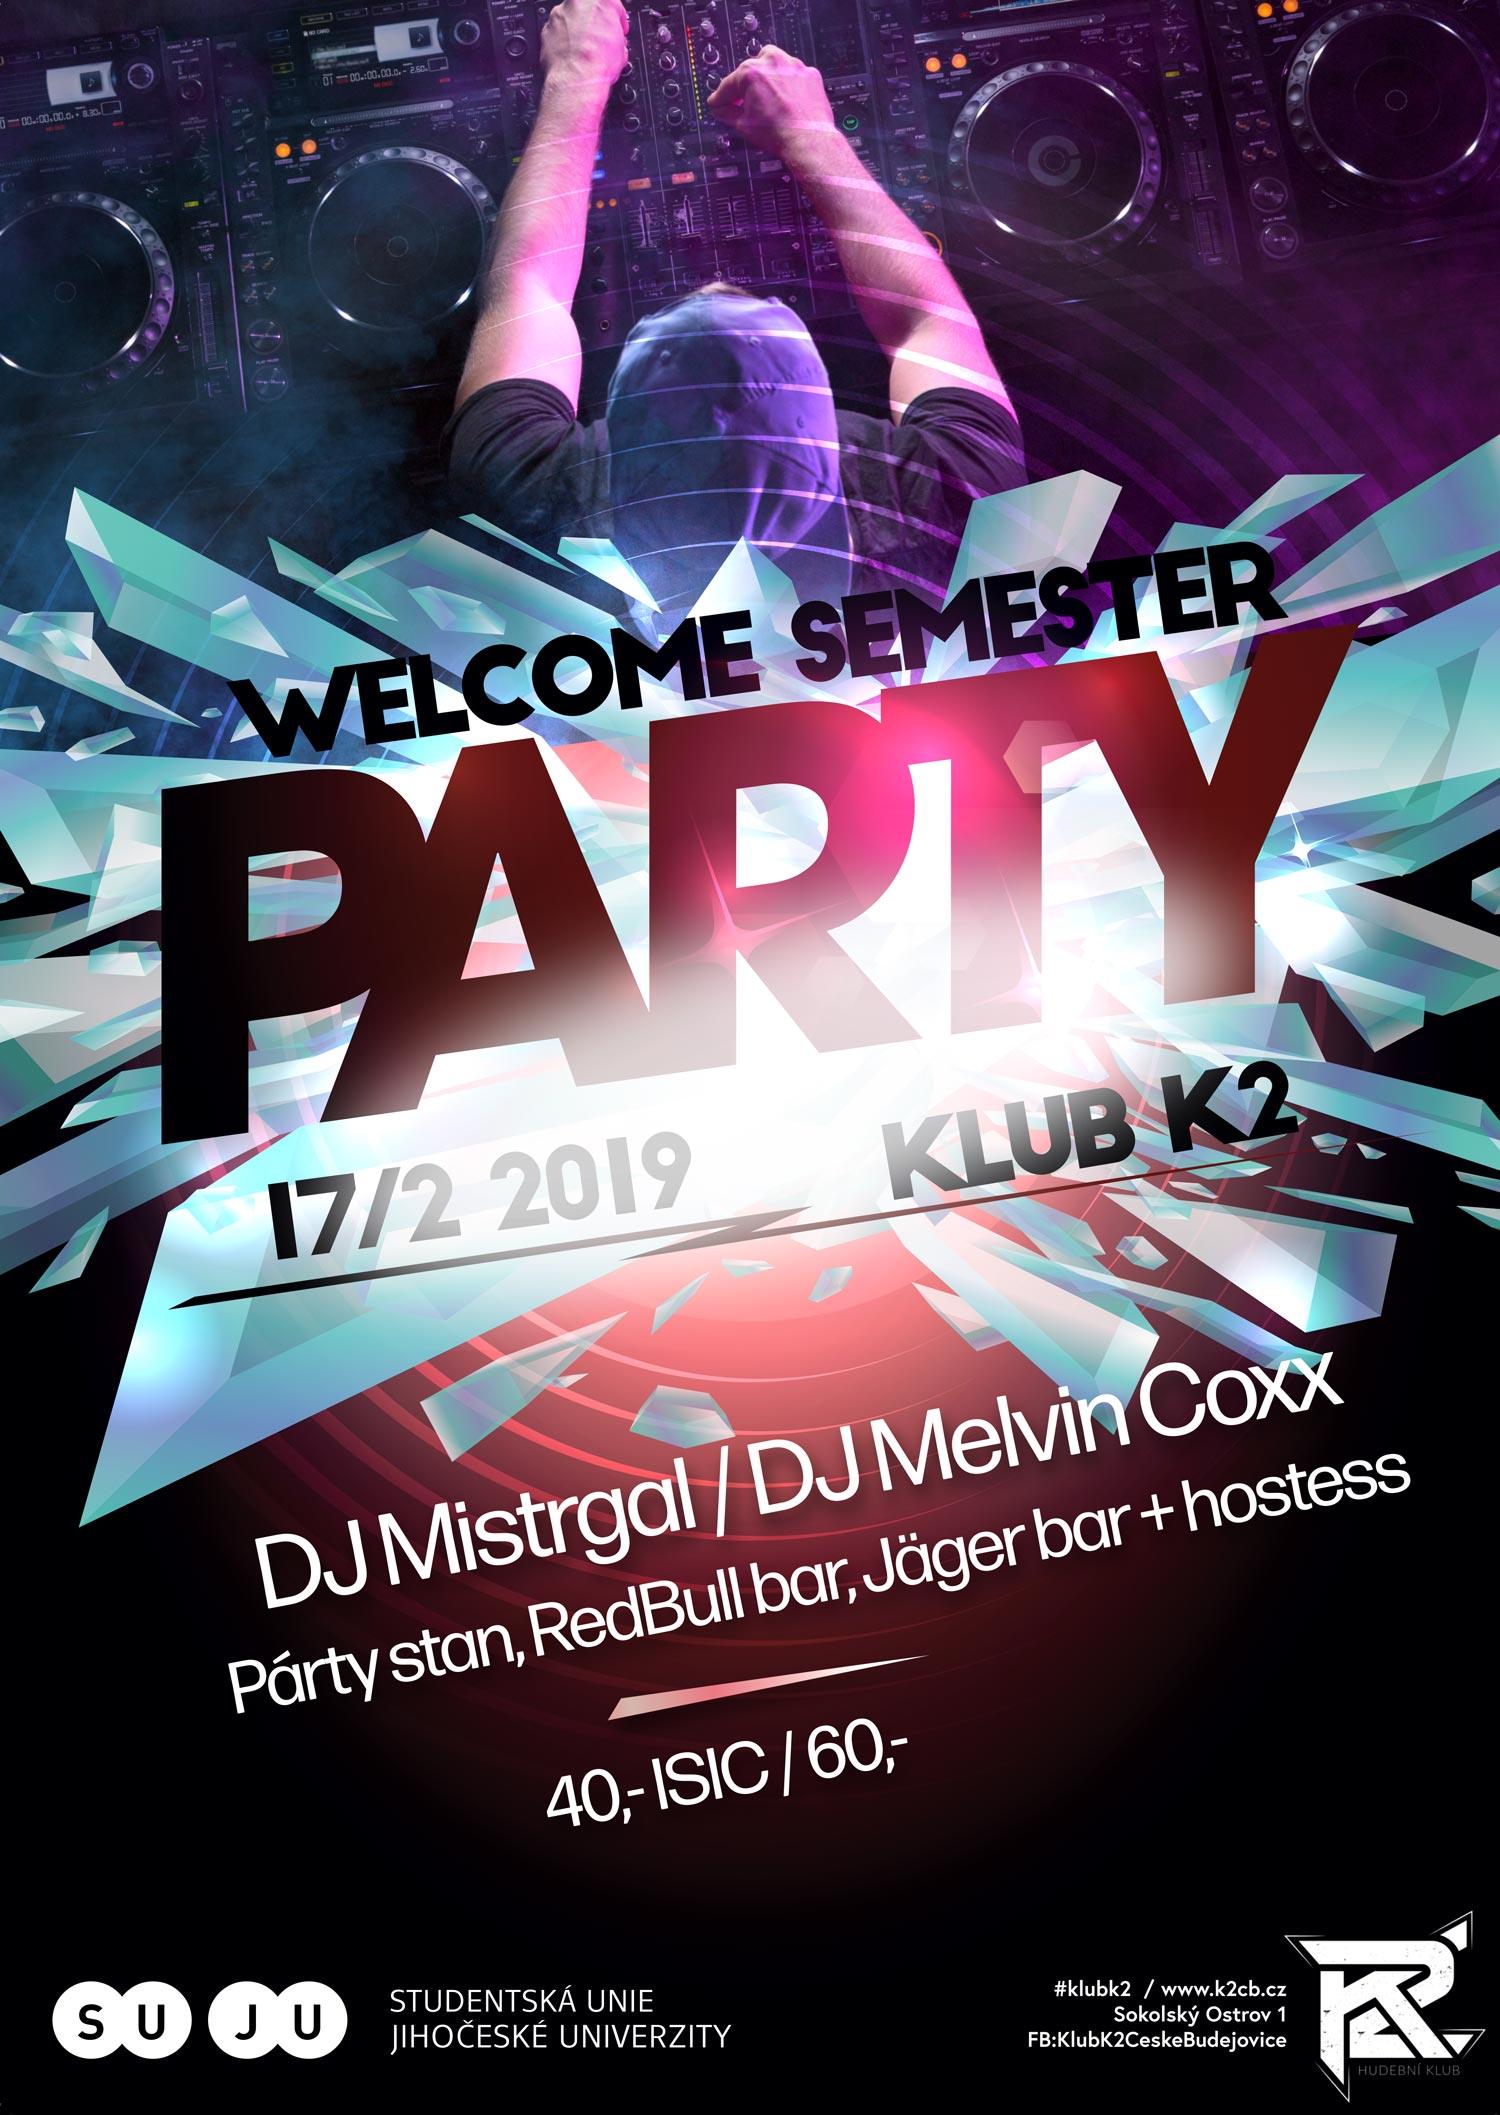 Welcome semester party